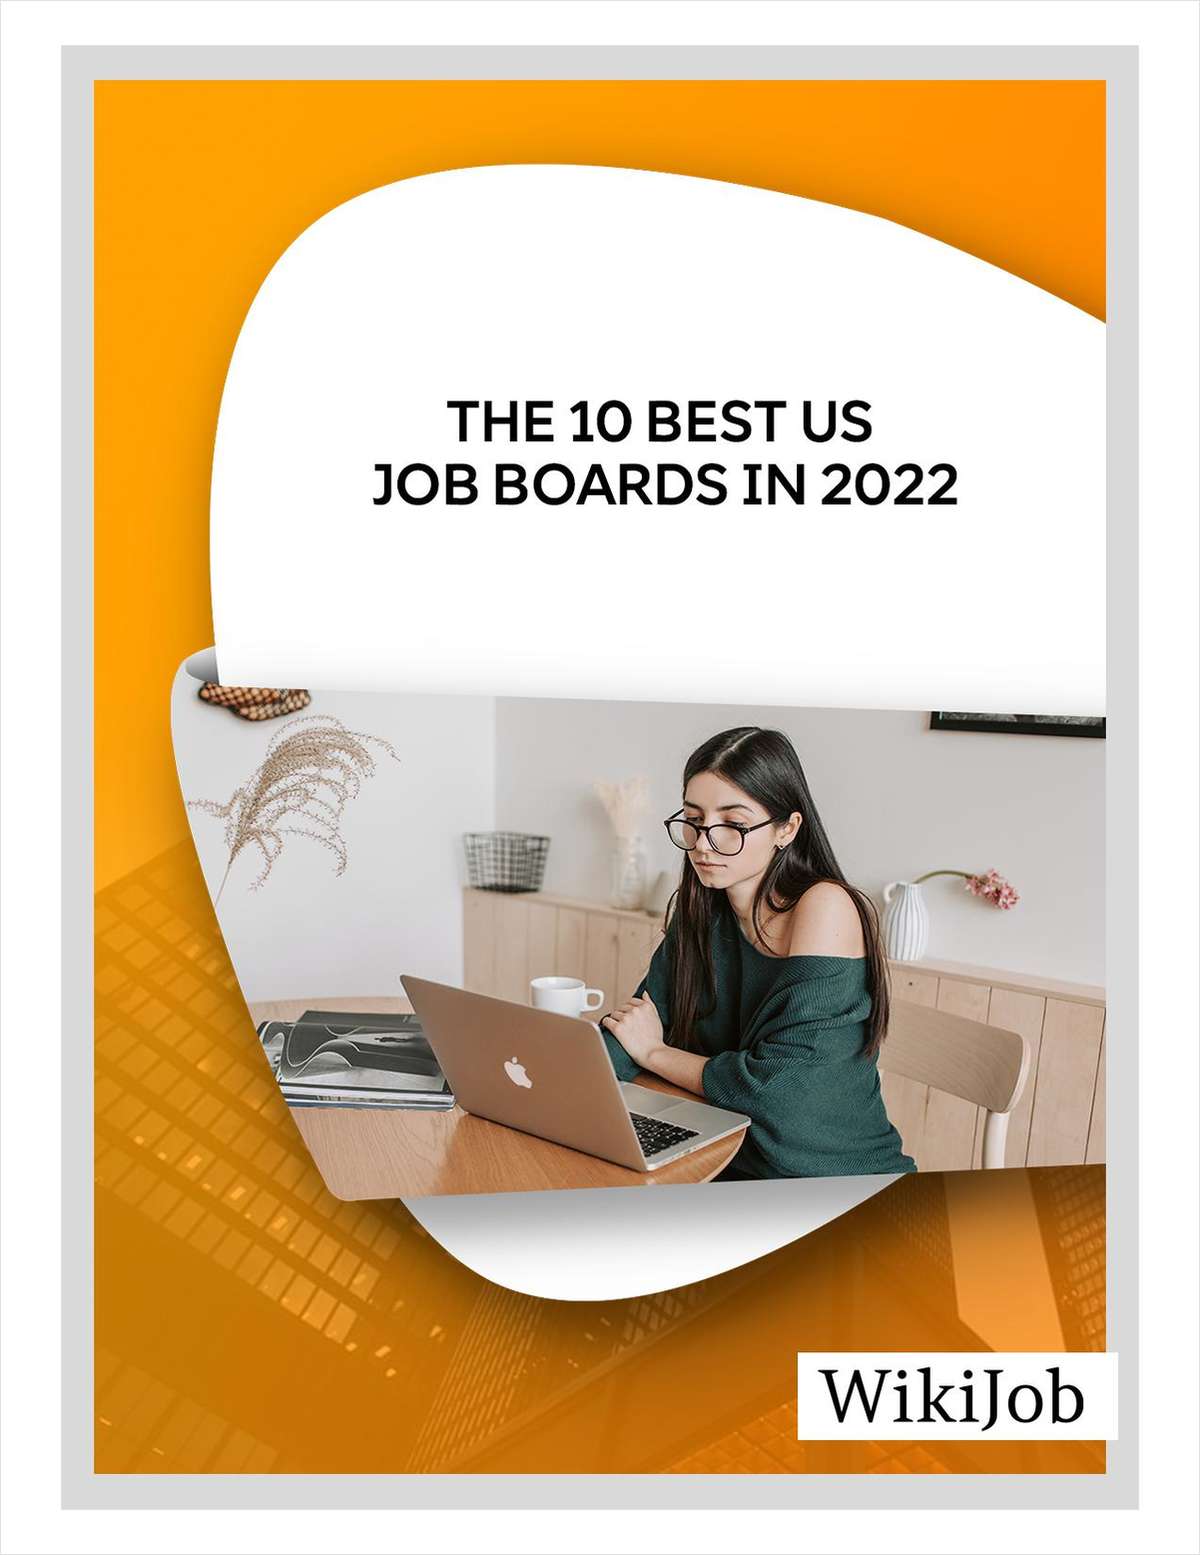 The 10 Best US Job Boards in 2022